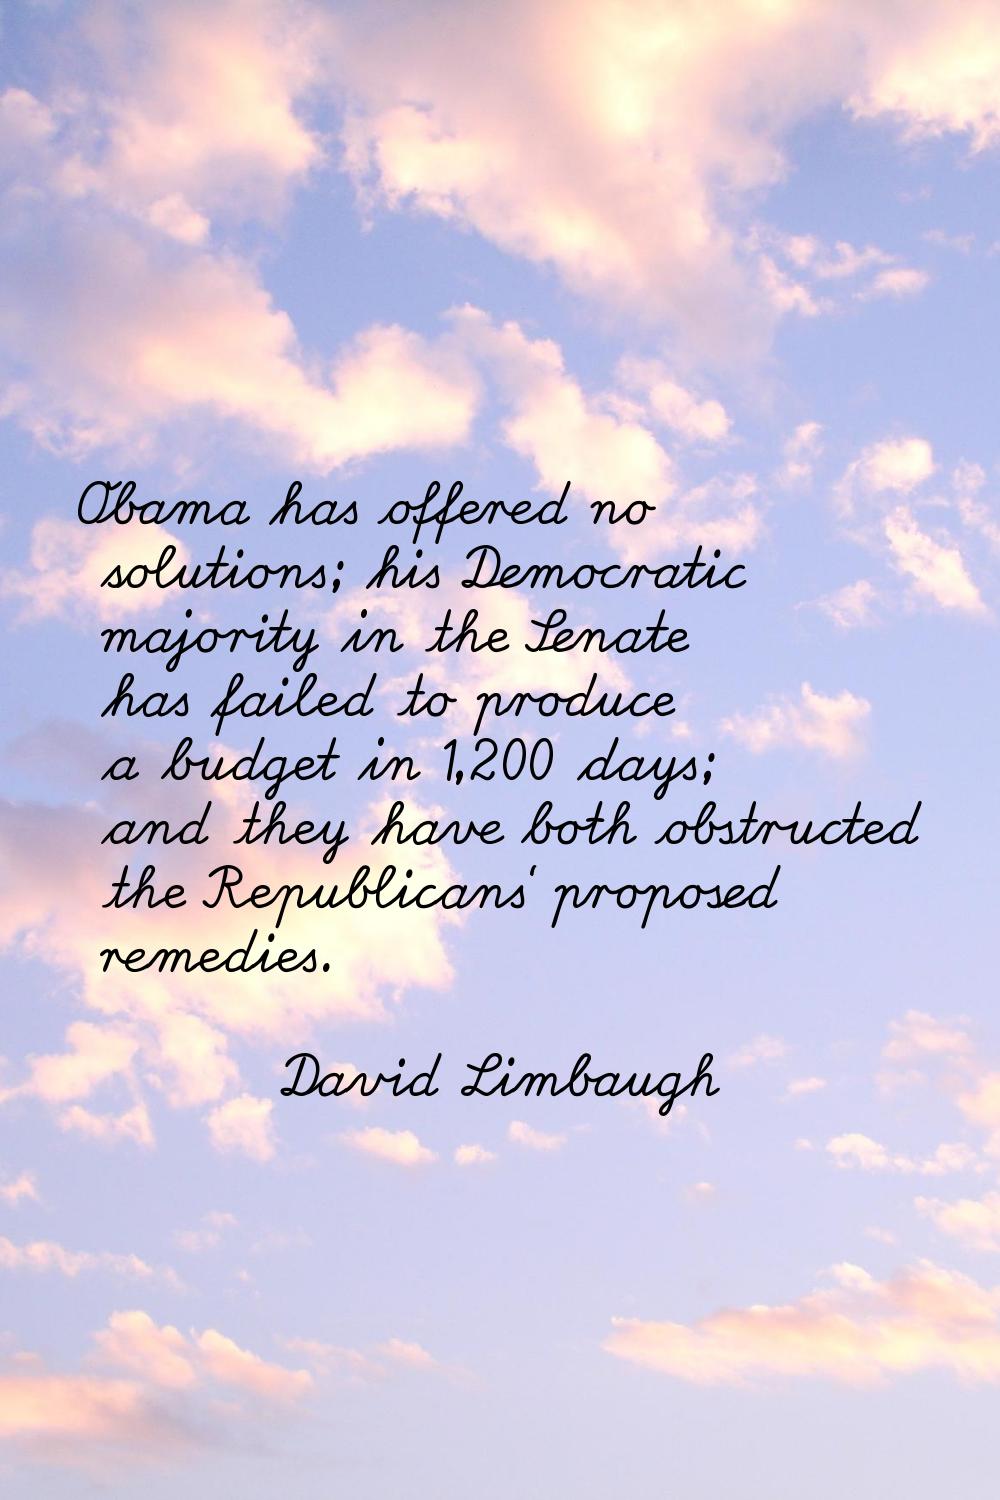 Obama has offered no solutions; his Democratic majority in the Senate has failed to produce a budge